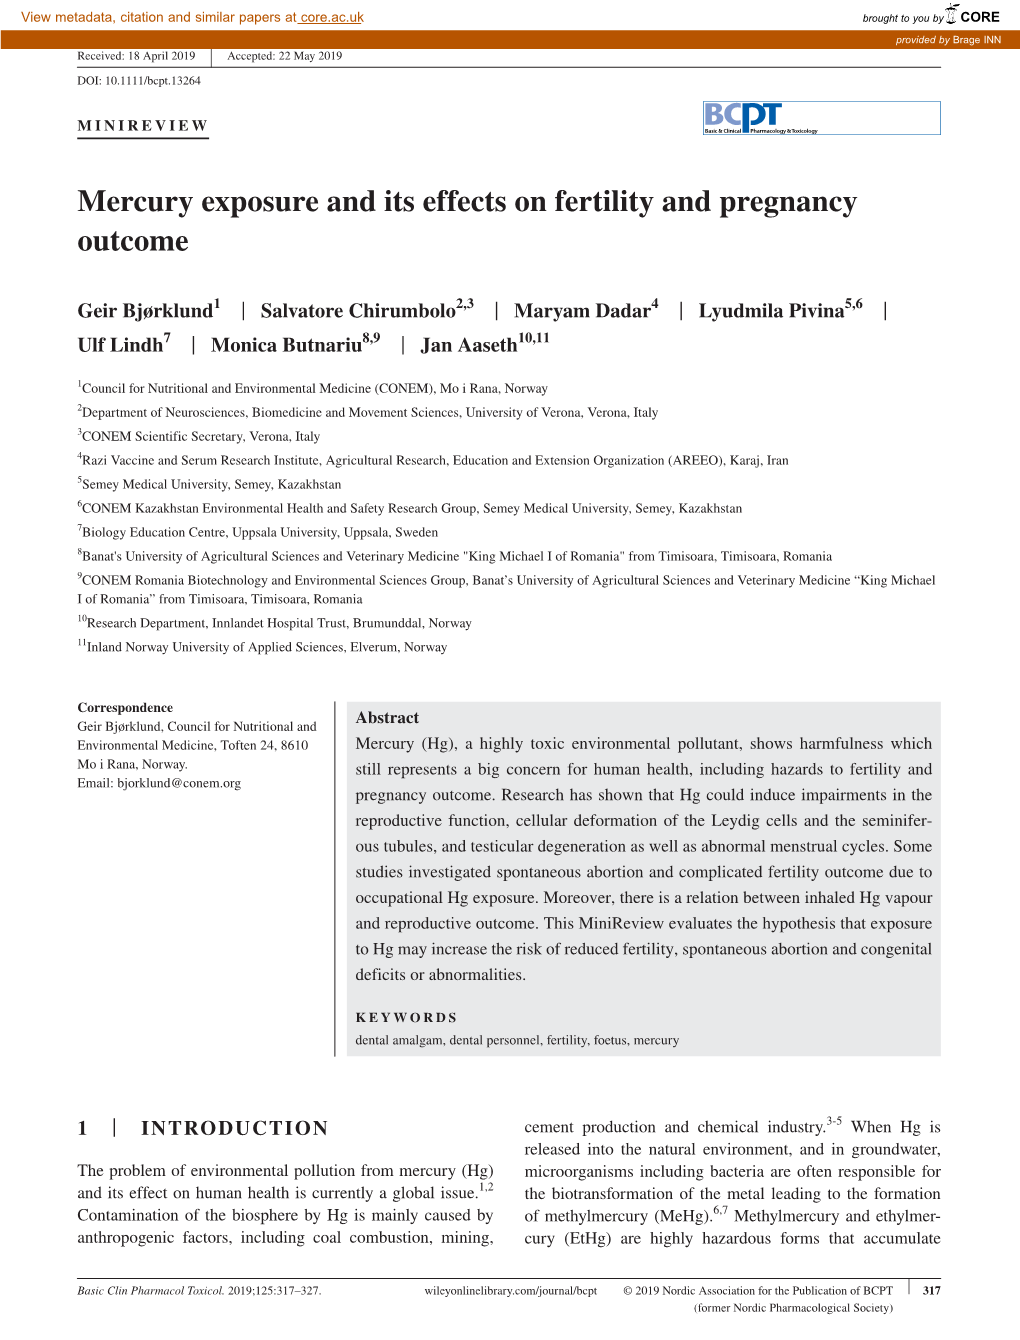 Mercury Exposure and Its Effects on Fertility and Pregnancy Outcome